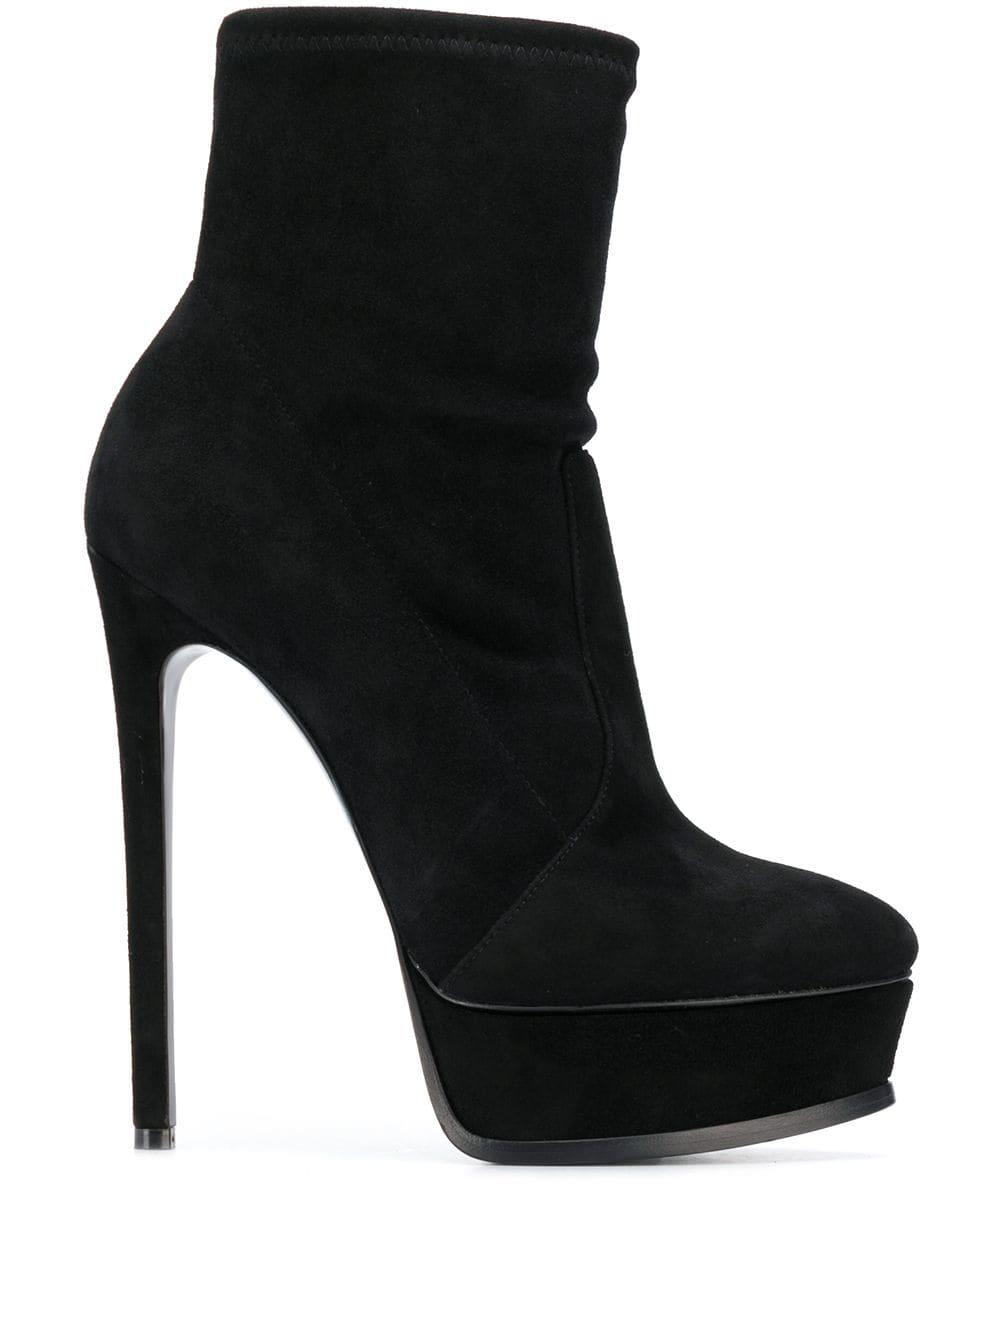 Casadei Leather Platform Ankle Boots in Black - Lyst